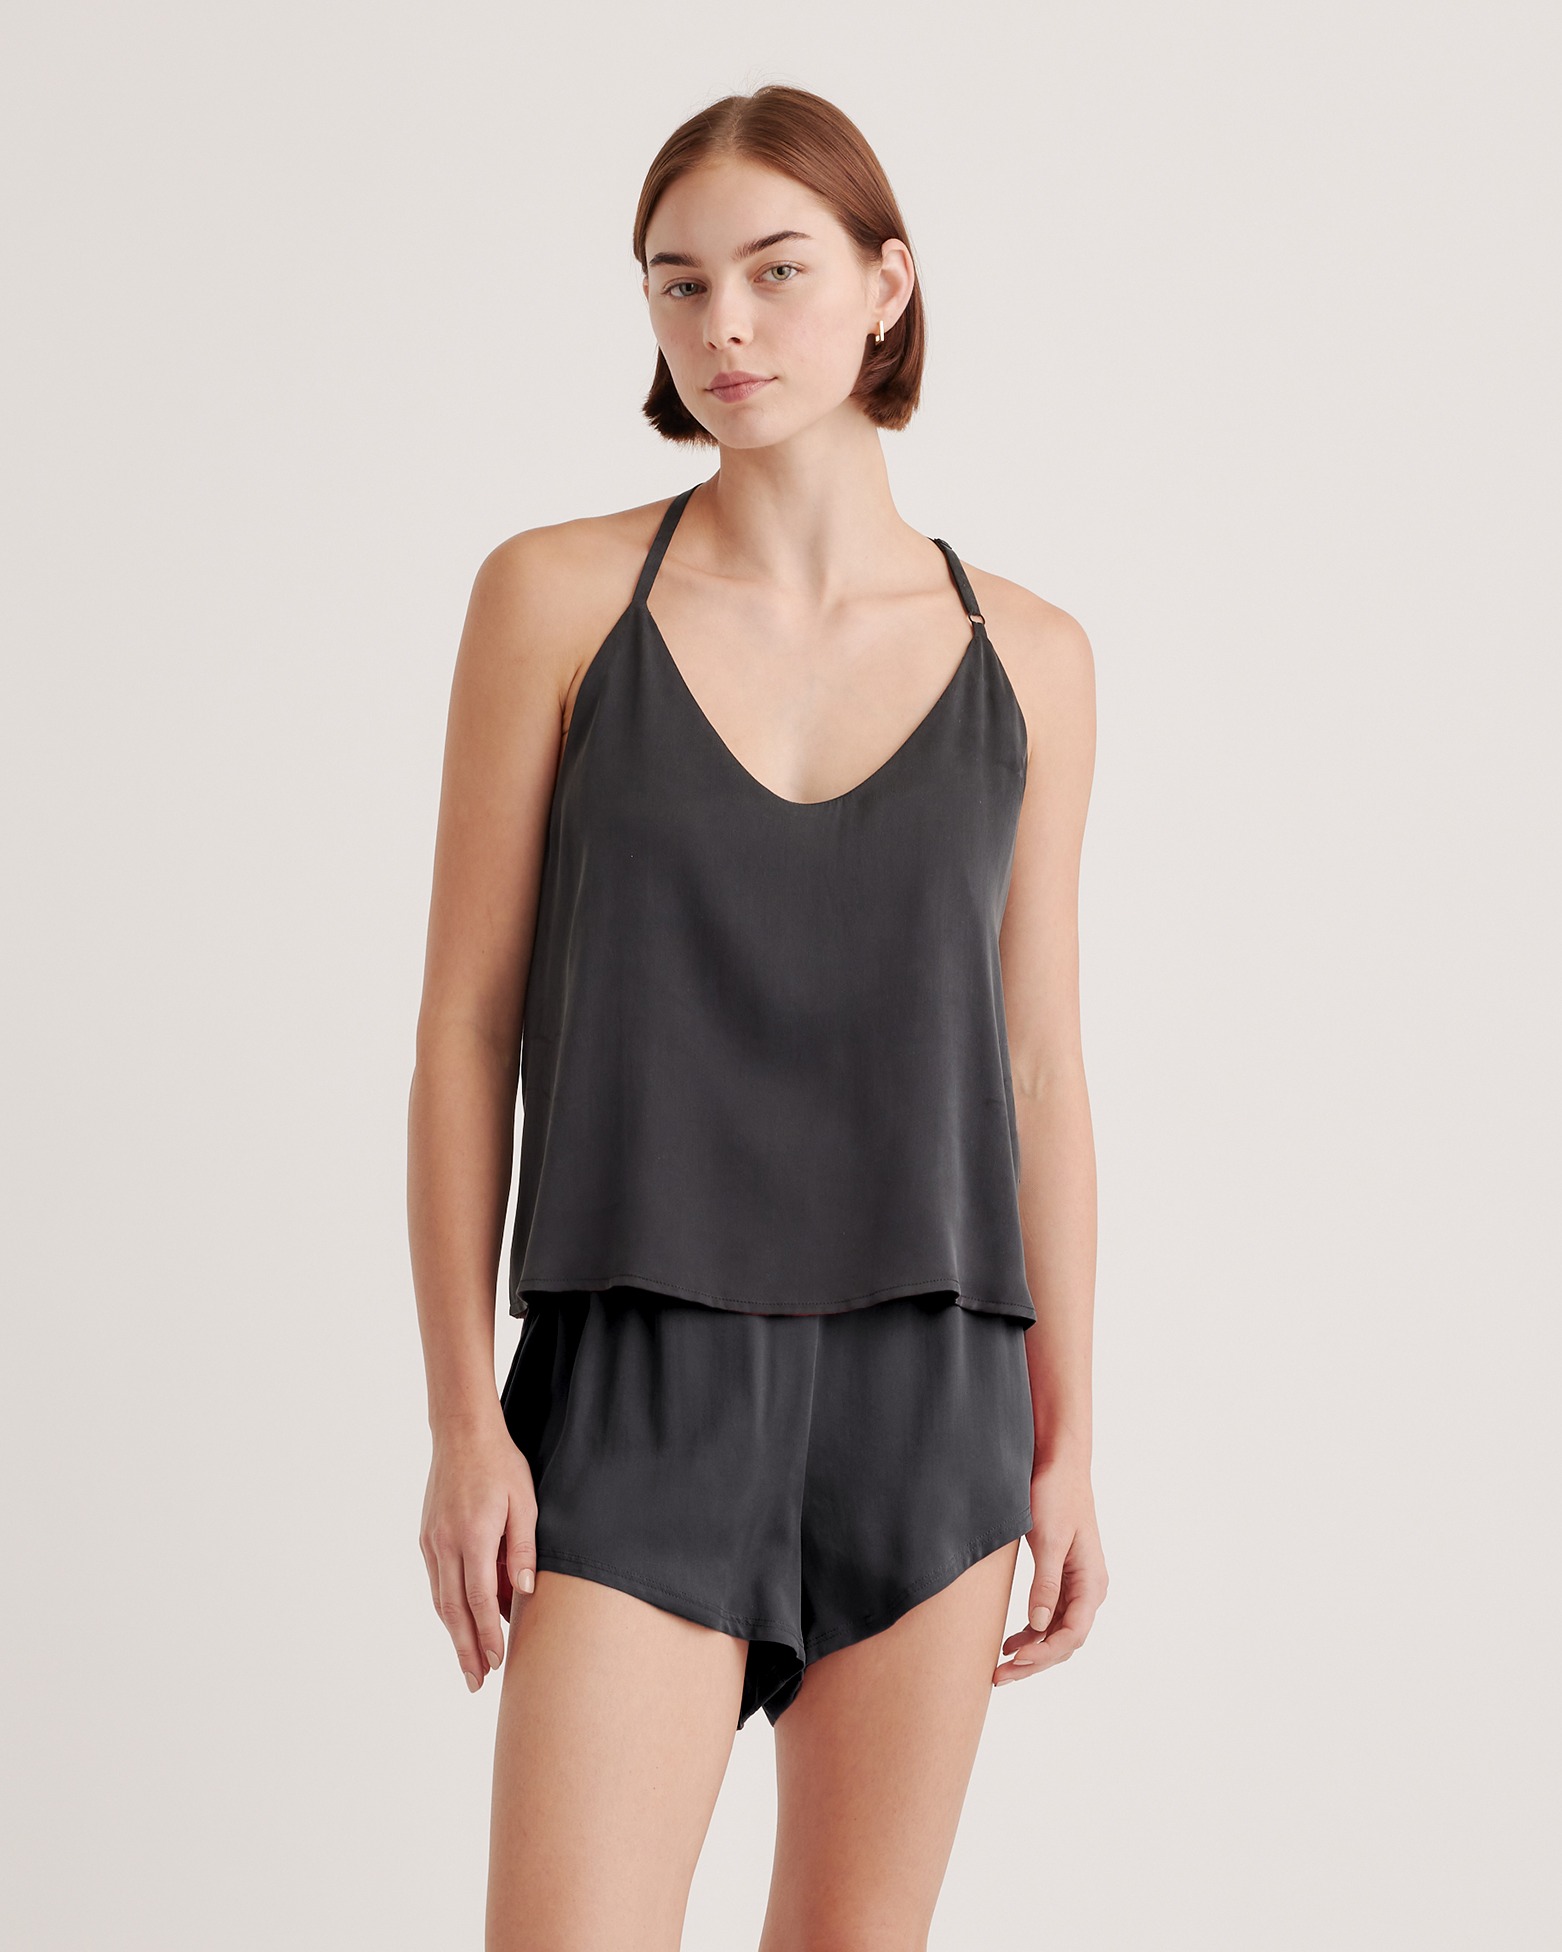 Washable Stretch Silk Cami[Picked from QUINCE] The classic